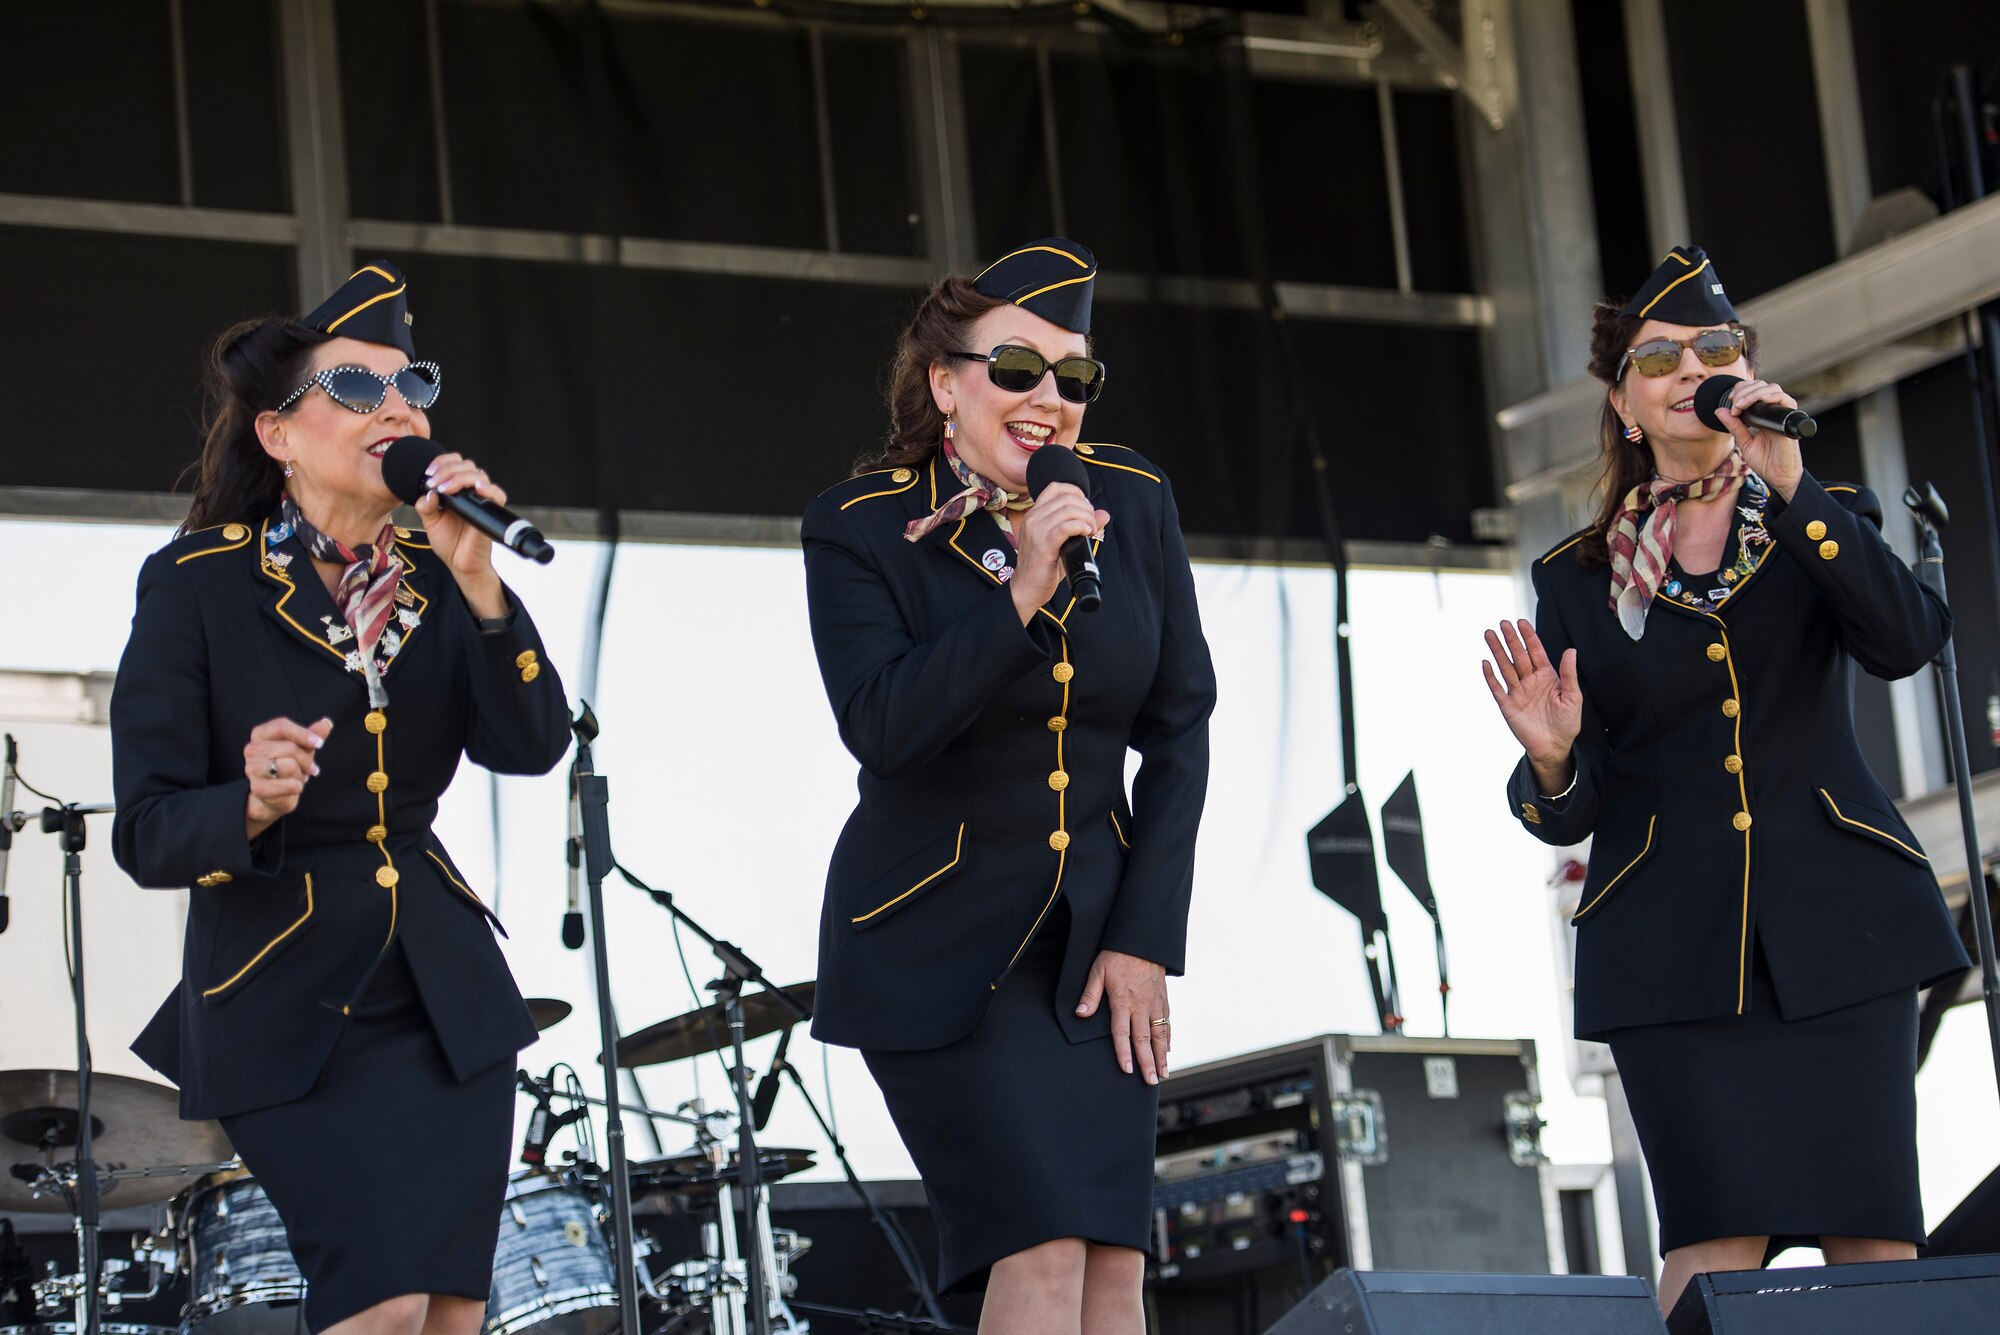 The Ladies for Liberty perform during the Scott Airshow and Open House at Scott Air Force Base, Ill., June 11, 2017. Ladies for Liberty is a singing troupe dedicated to performing the Andrew Sisters style of music through their own rendition of vocals, costumes, hairstyles, and the spirit of patriotism reminiscent of the 1940s. (U.S. Air Force photo by Tech. Sgt. Jonathan Fowler)